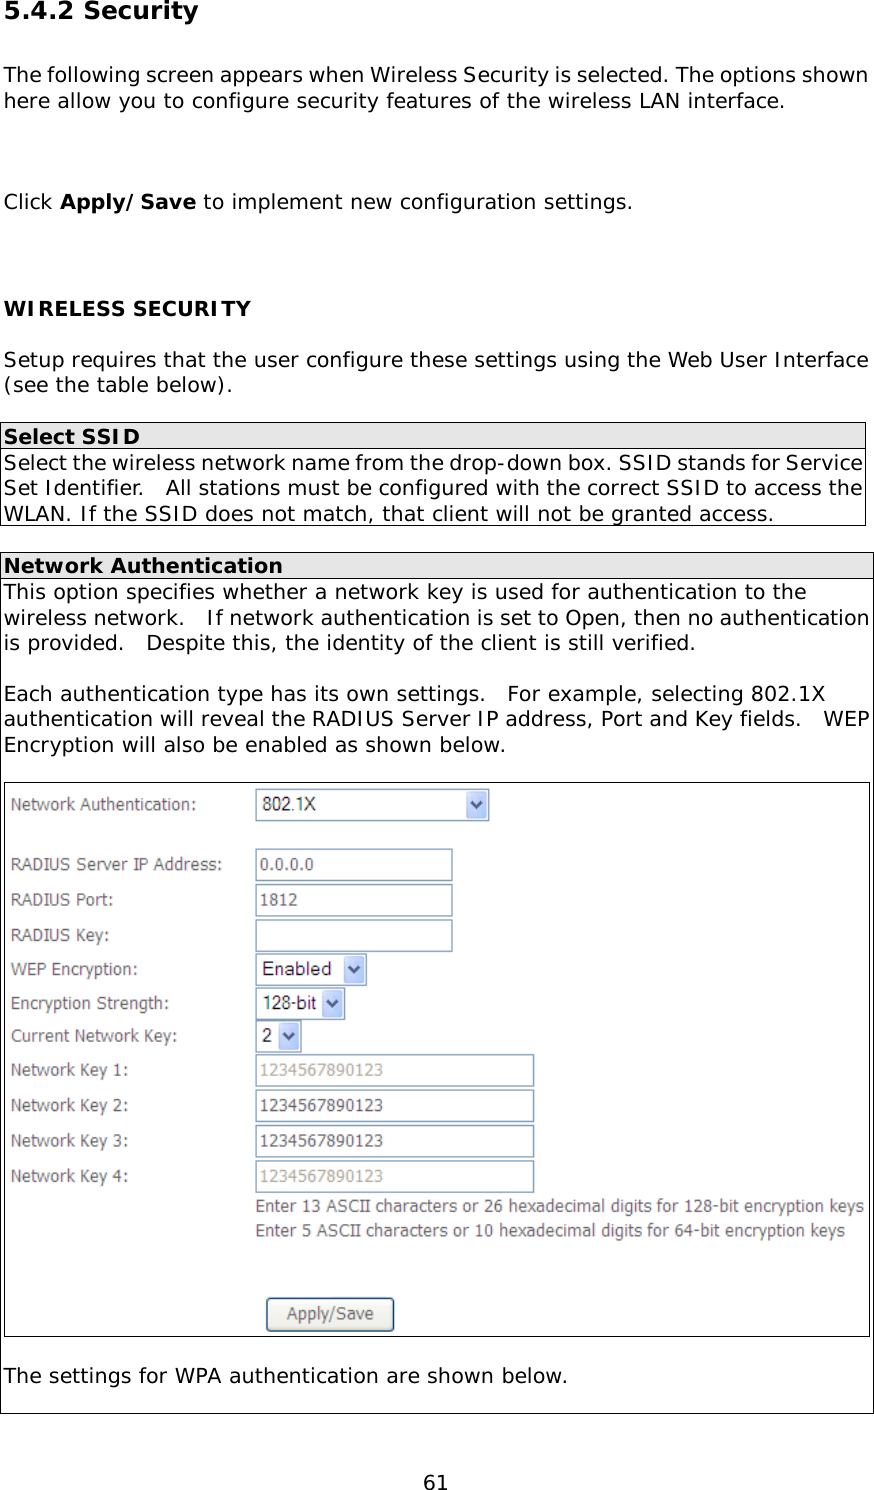  61 5.4.2 Security The following screen appears when Wireless Security is selected. The options shown here allow you to configure security features of the wireless LAN interface.      Click Apply/Save to implement new configuration settings.  WIRELESS SECURITY  Setup requires that the user configure these settings using the Web User Interface (see the table below).    Select SSID Select the wireless network name from the drop-down box. SSID stands for Service Set Identifier.  All stations must be configured with the correct SSID to access the WLAN. If the SSID does not match, that client will not be granted access.  Network Authentication This option specifies whether a network key is used for authentication to the wireless network.  If network authentication is set to Open, then no authentication is provided.  Despite this, the identity of the client is still verified.    Each authentication type has its own settings.  For example, selecting 802.1X authentication will reveal the RADIUS Server IP address, Port and Key fields.  WEP Encryption will also be enabled as shown below.    The settings for WPA authentication are shown below.  